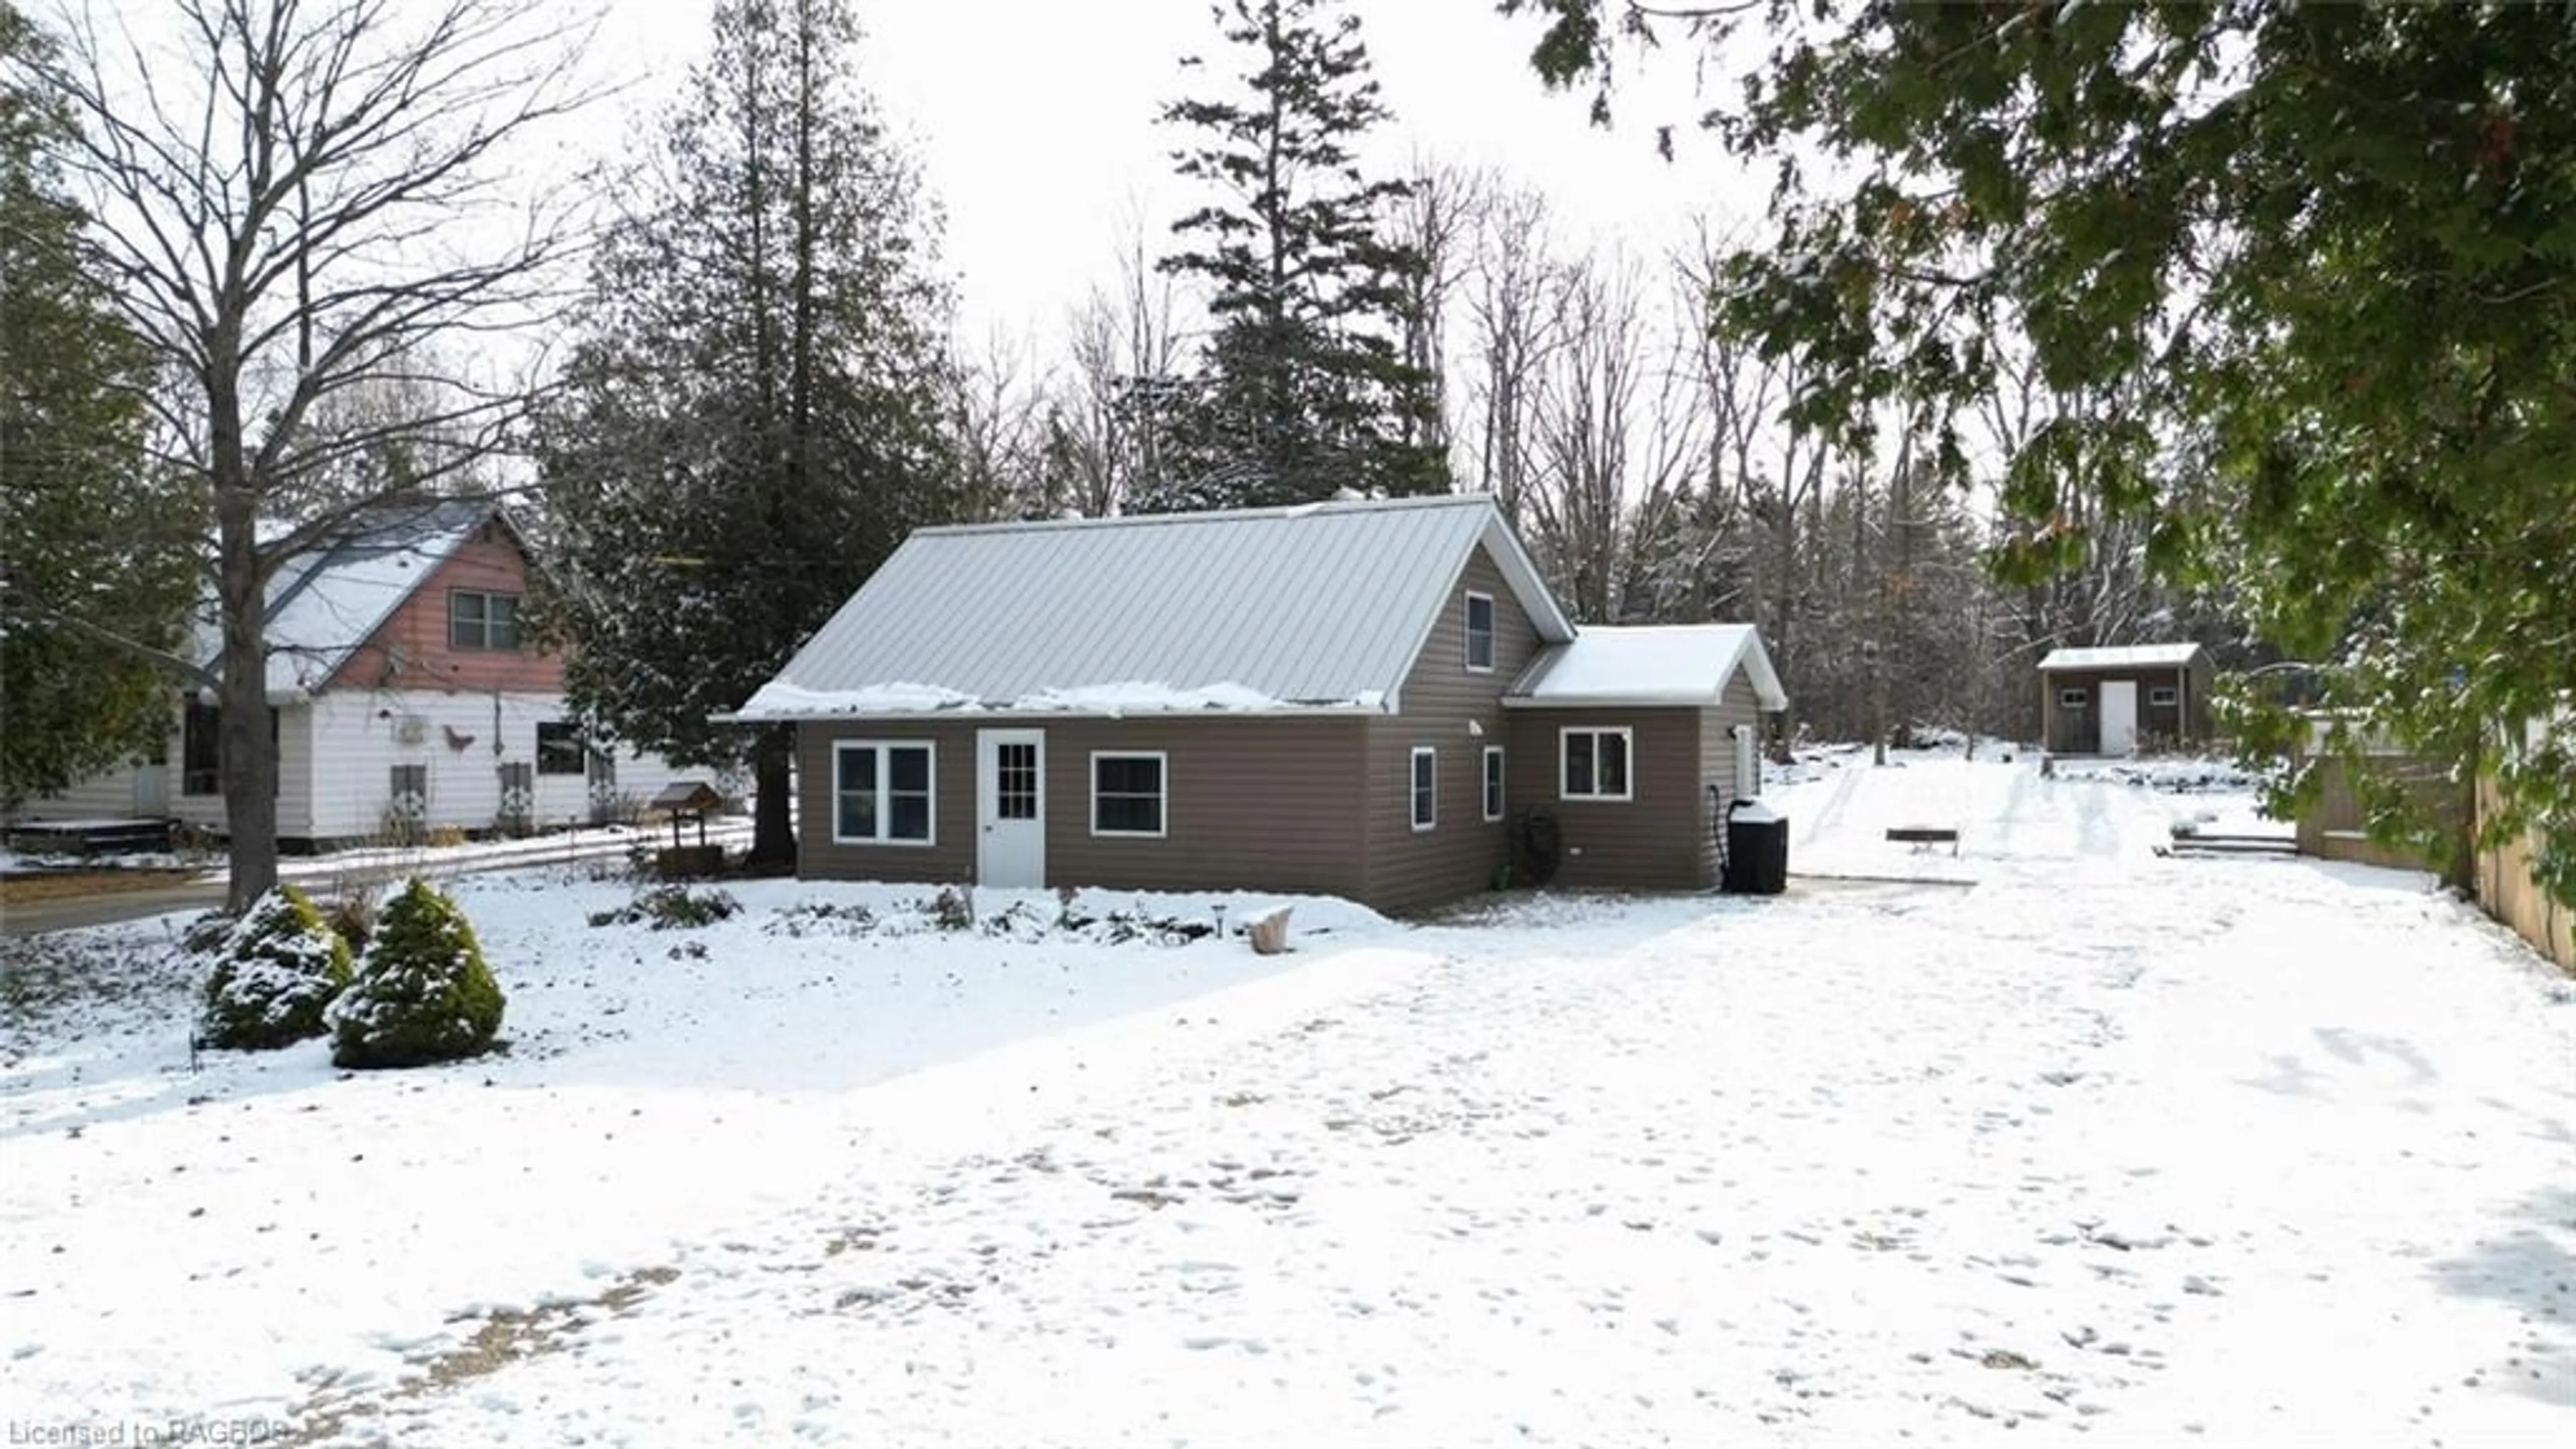 Cottage for 549 Stokes Bay Rd, Stokes Bay Ontario N0H 2M0